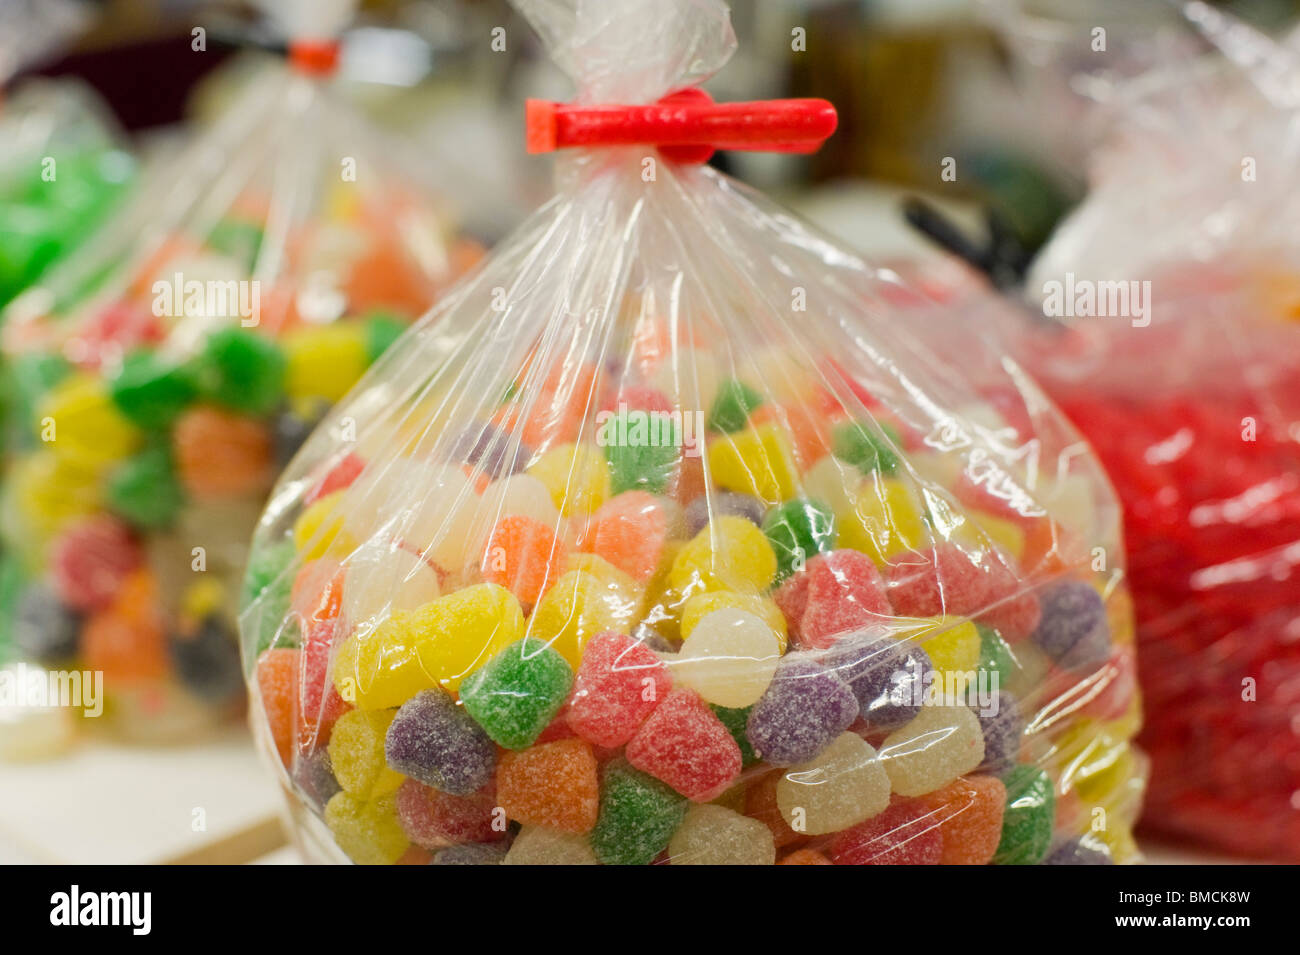 Close-up of Bags of Candy Stock Photo